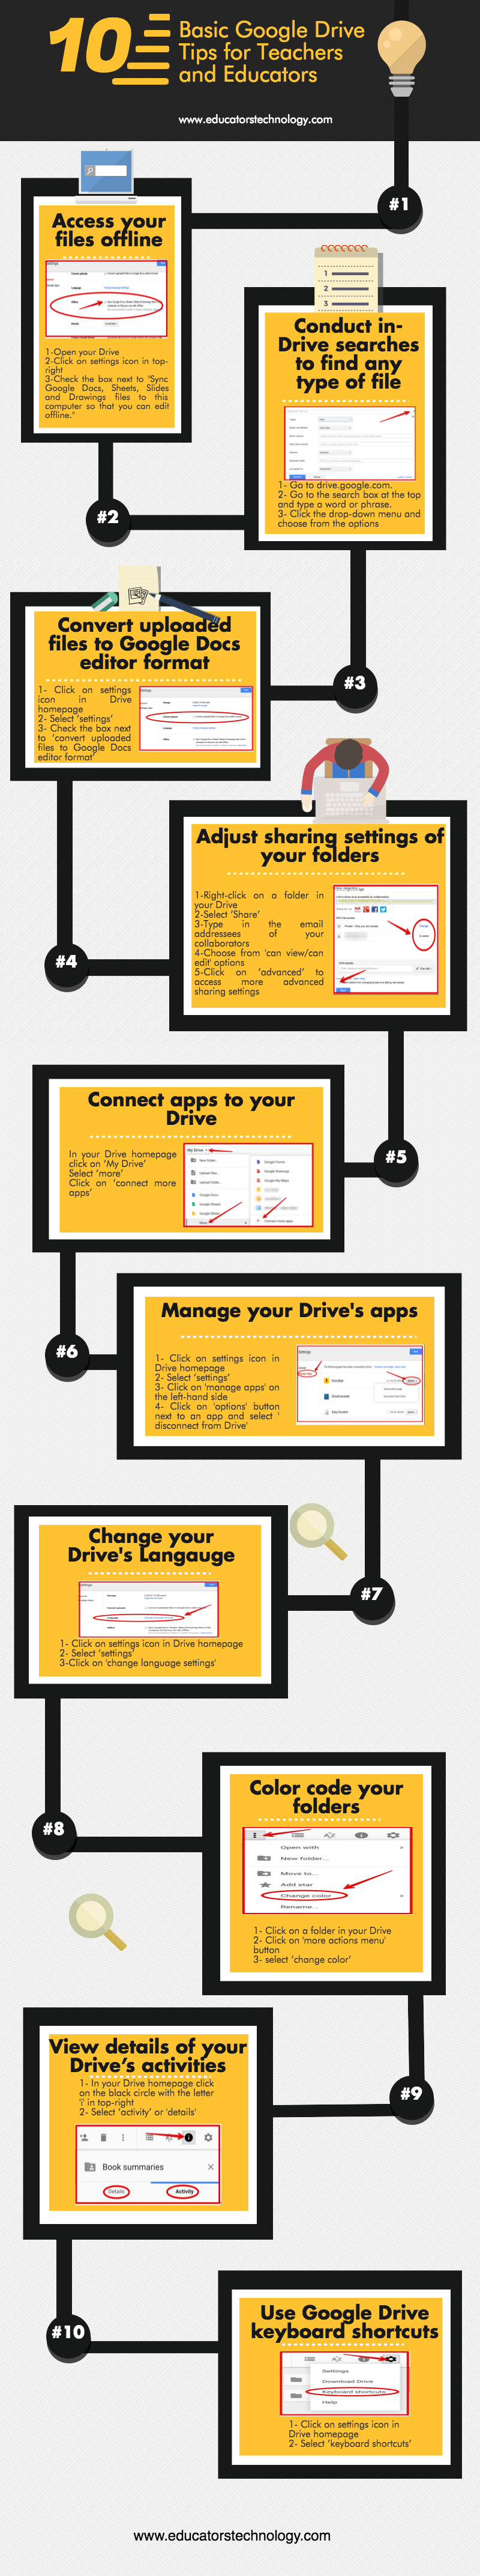 10 Handy Google Drive Tips Every Teacher Should Know about